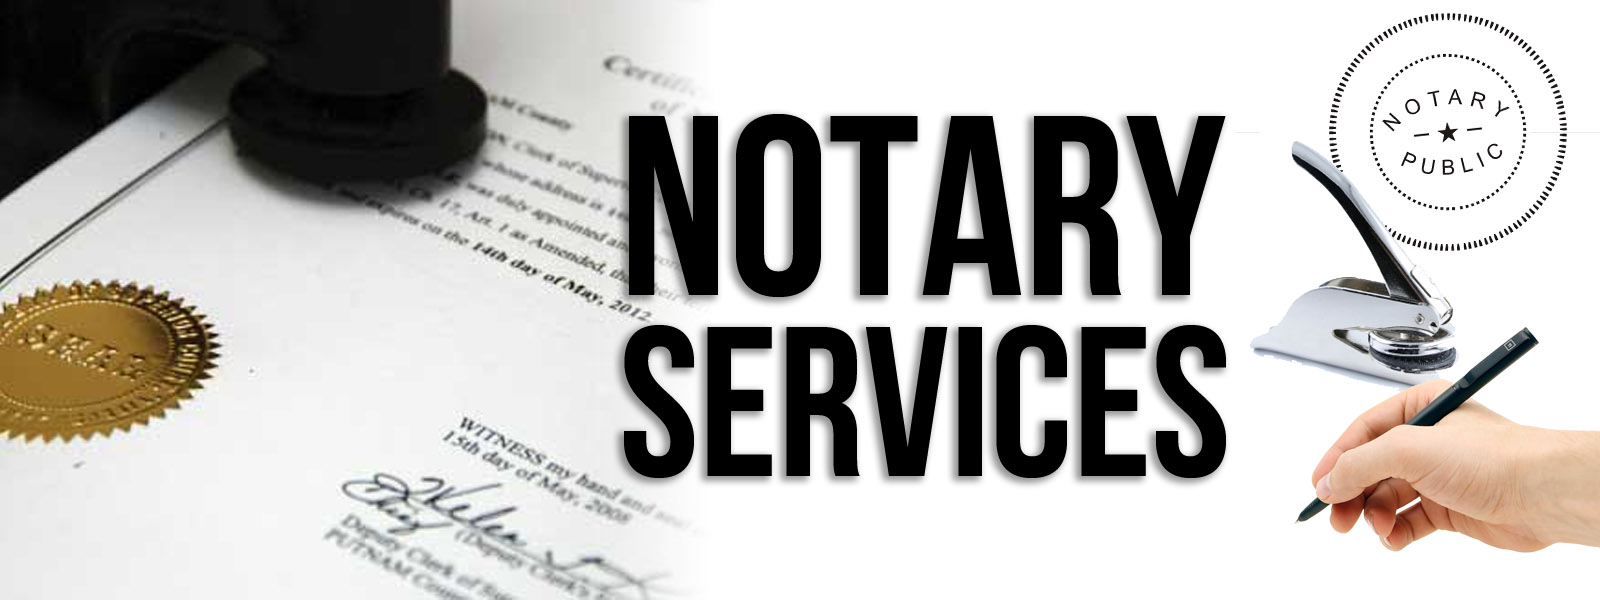 notary-services-now-available-durham-public-library-in-durham-ct-connecticut